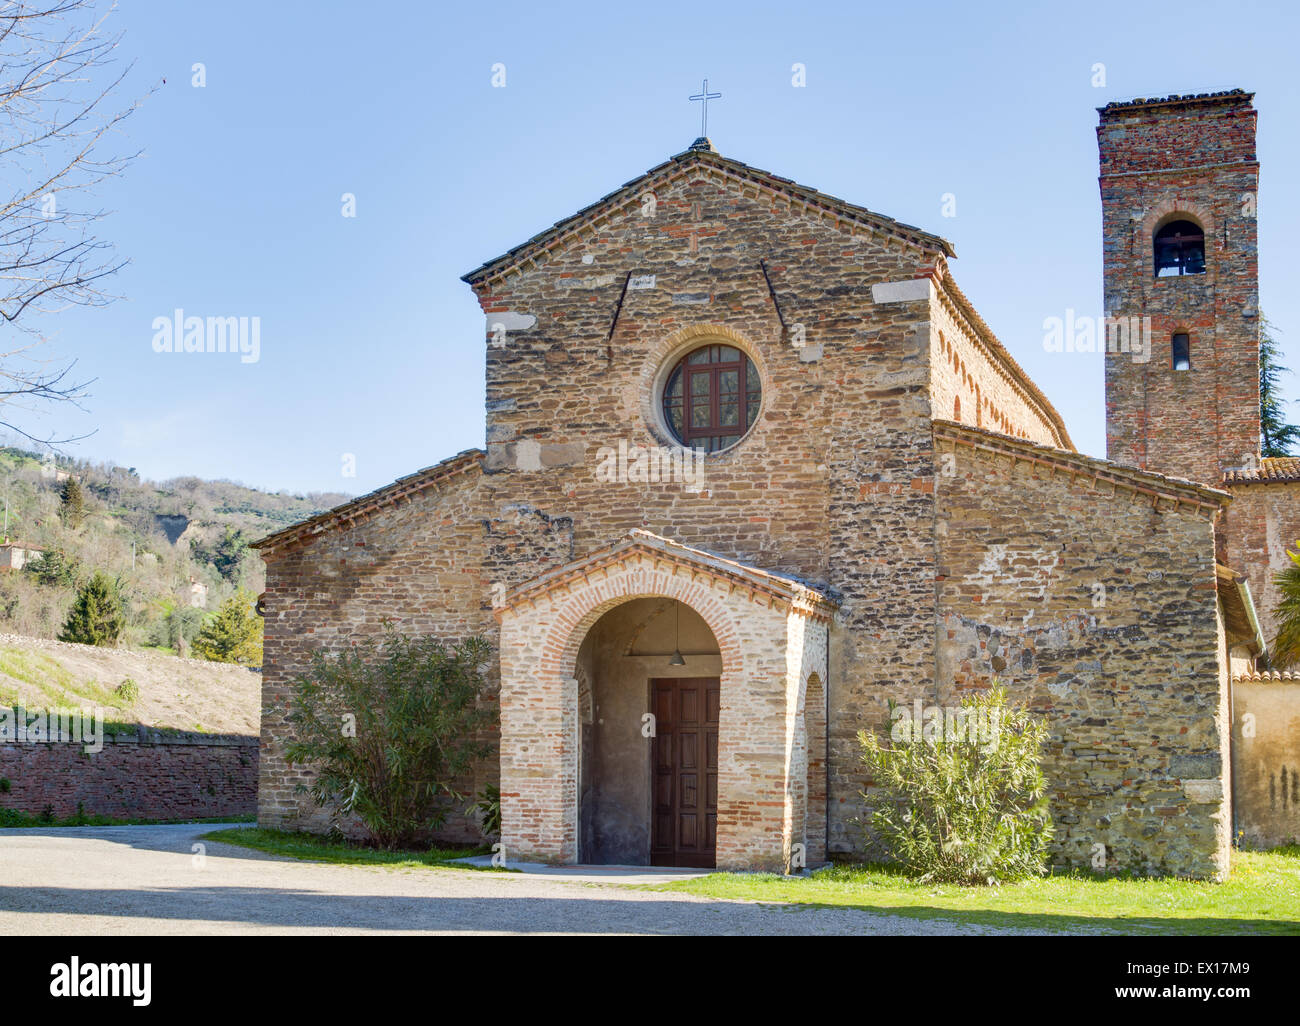 The Romanesque style church of St John at the eighth, also known as Church of Tho in Northern Italy offers a magical atmosphere full of Spirituality and trust Stock Photo